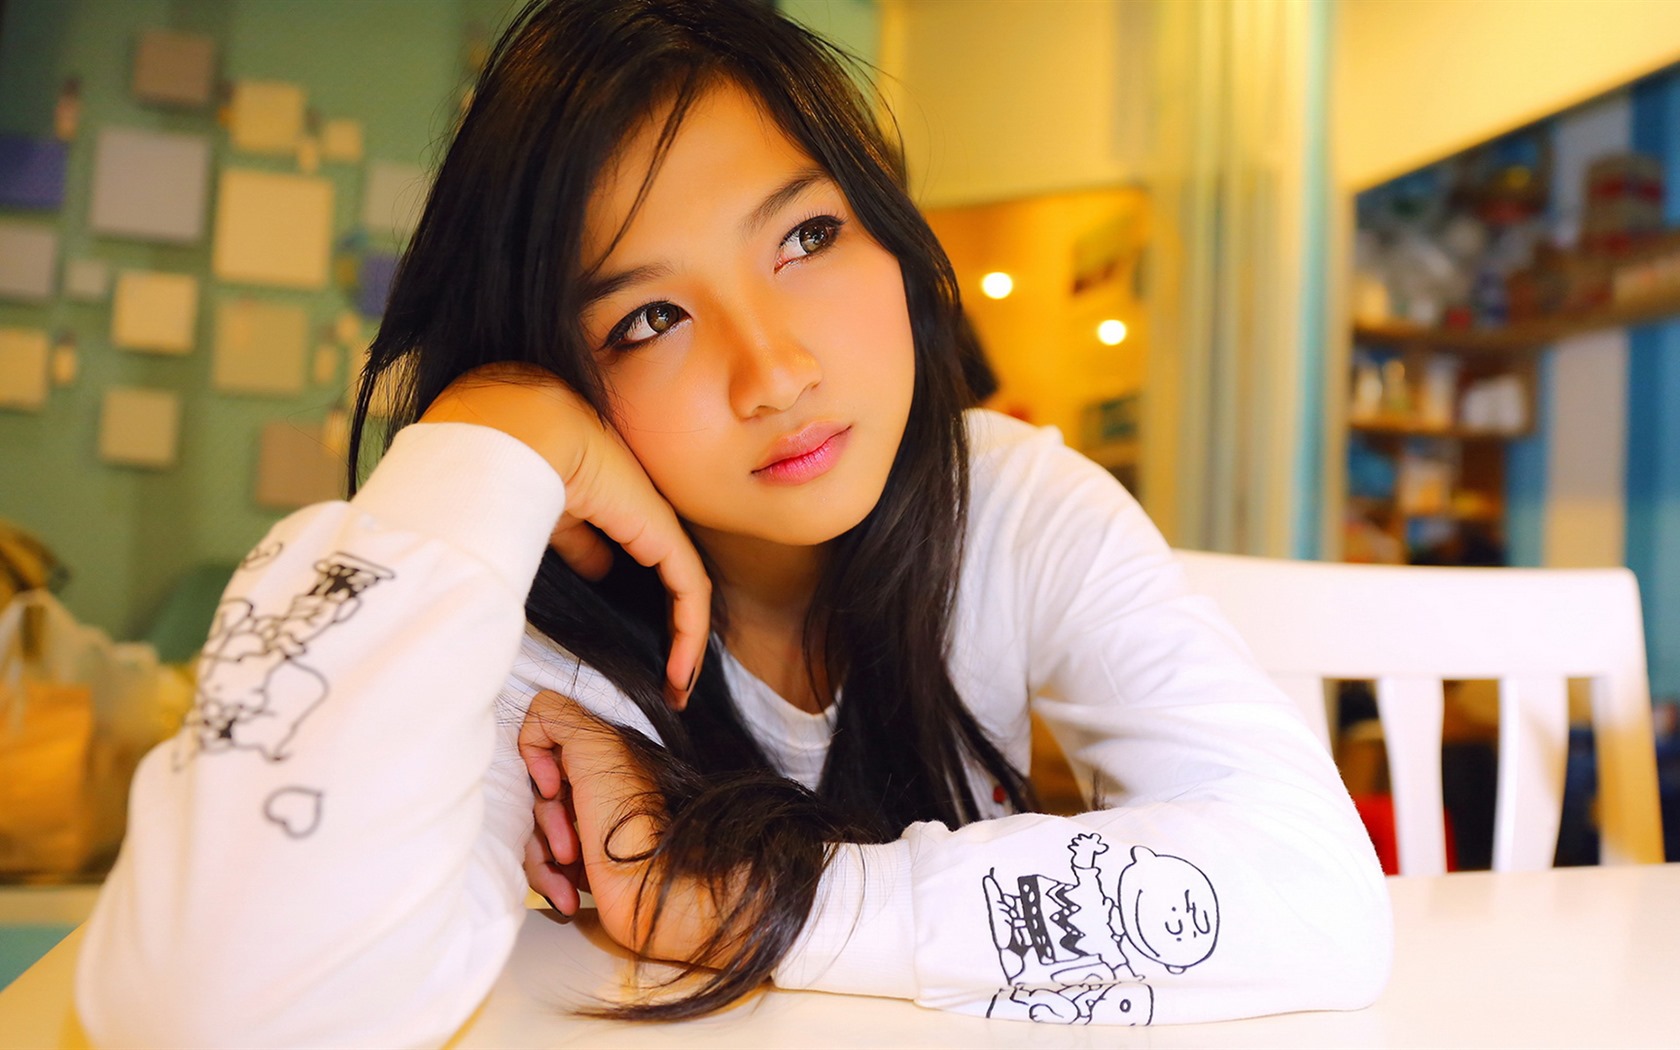 Pure and lovely young Asian girl HD wallpapers collection (2) #9 - 1680x1050